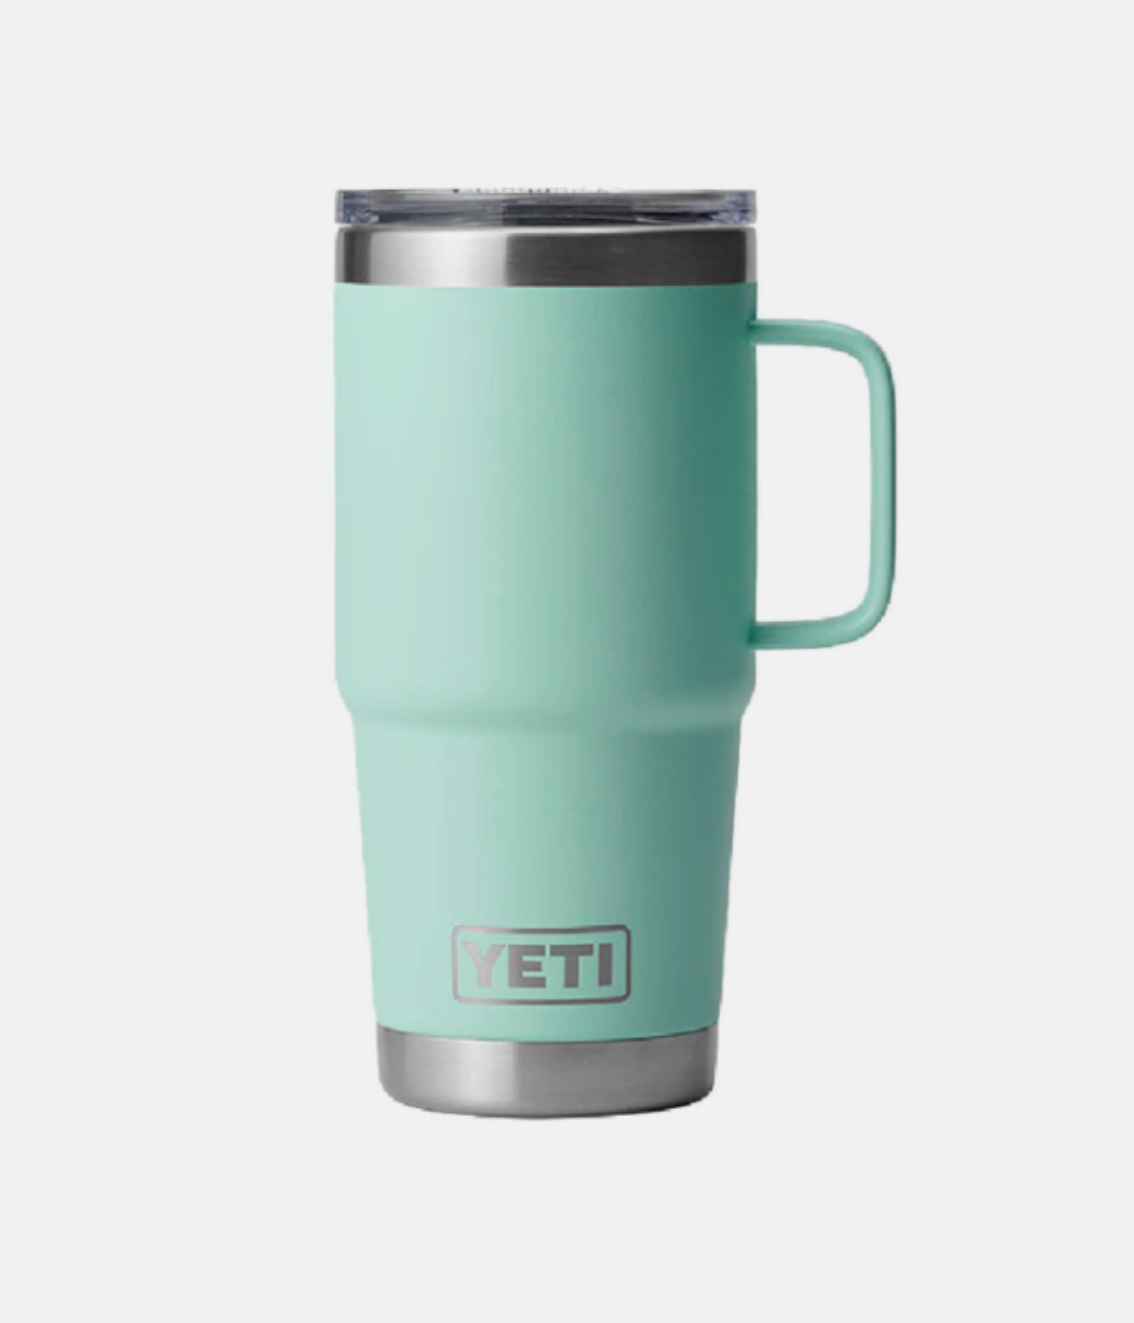 🔹Yeti 8oz Stackable Cup🔹 Just enough coffee for just about